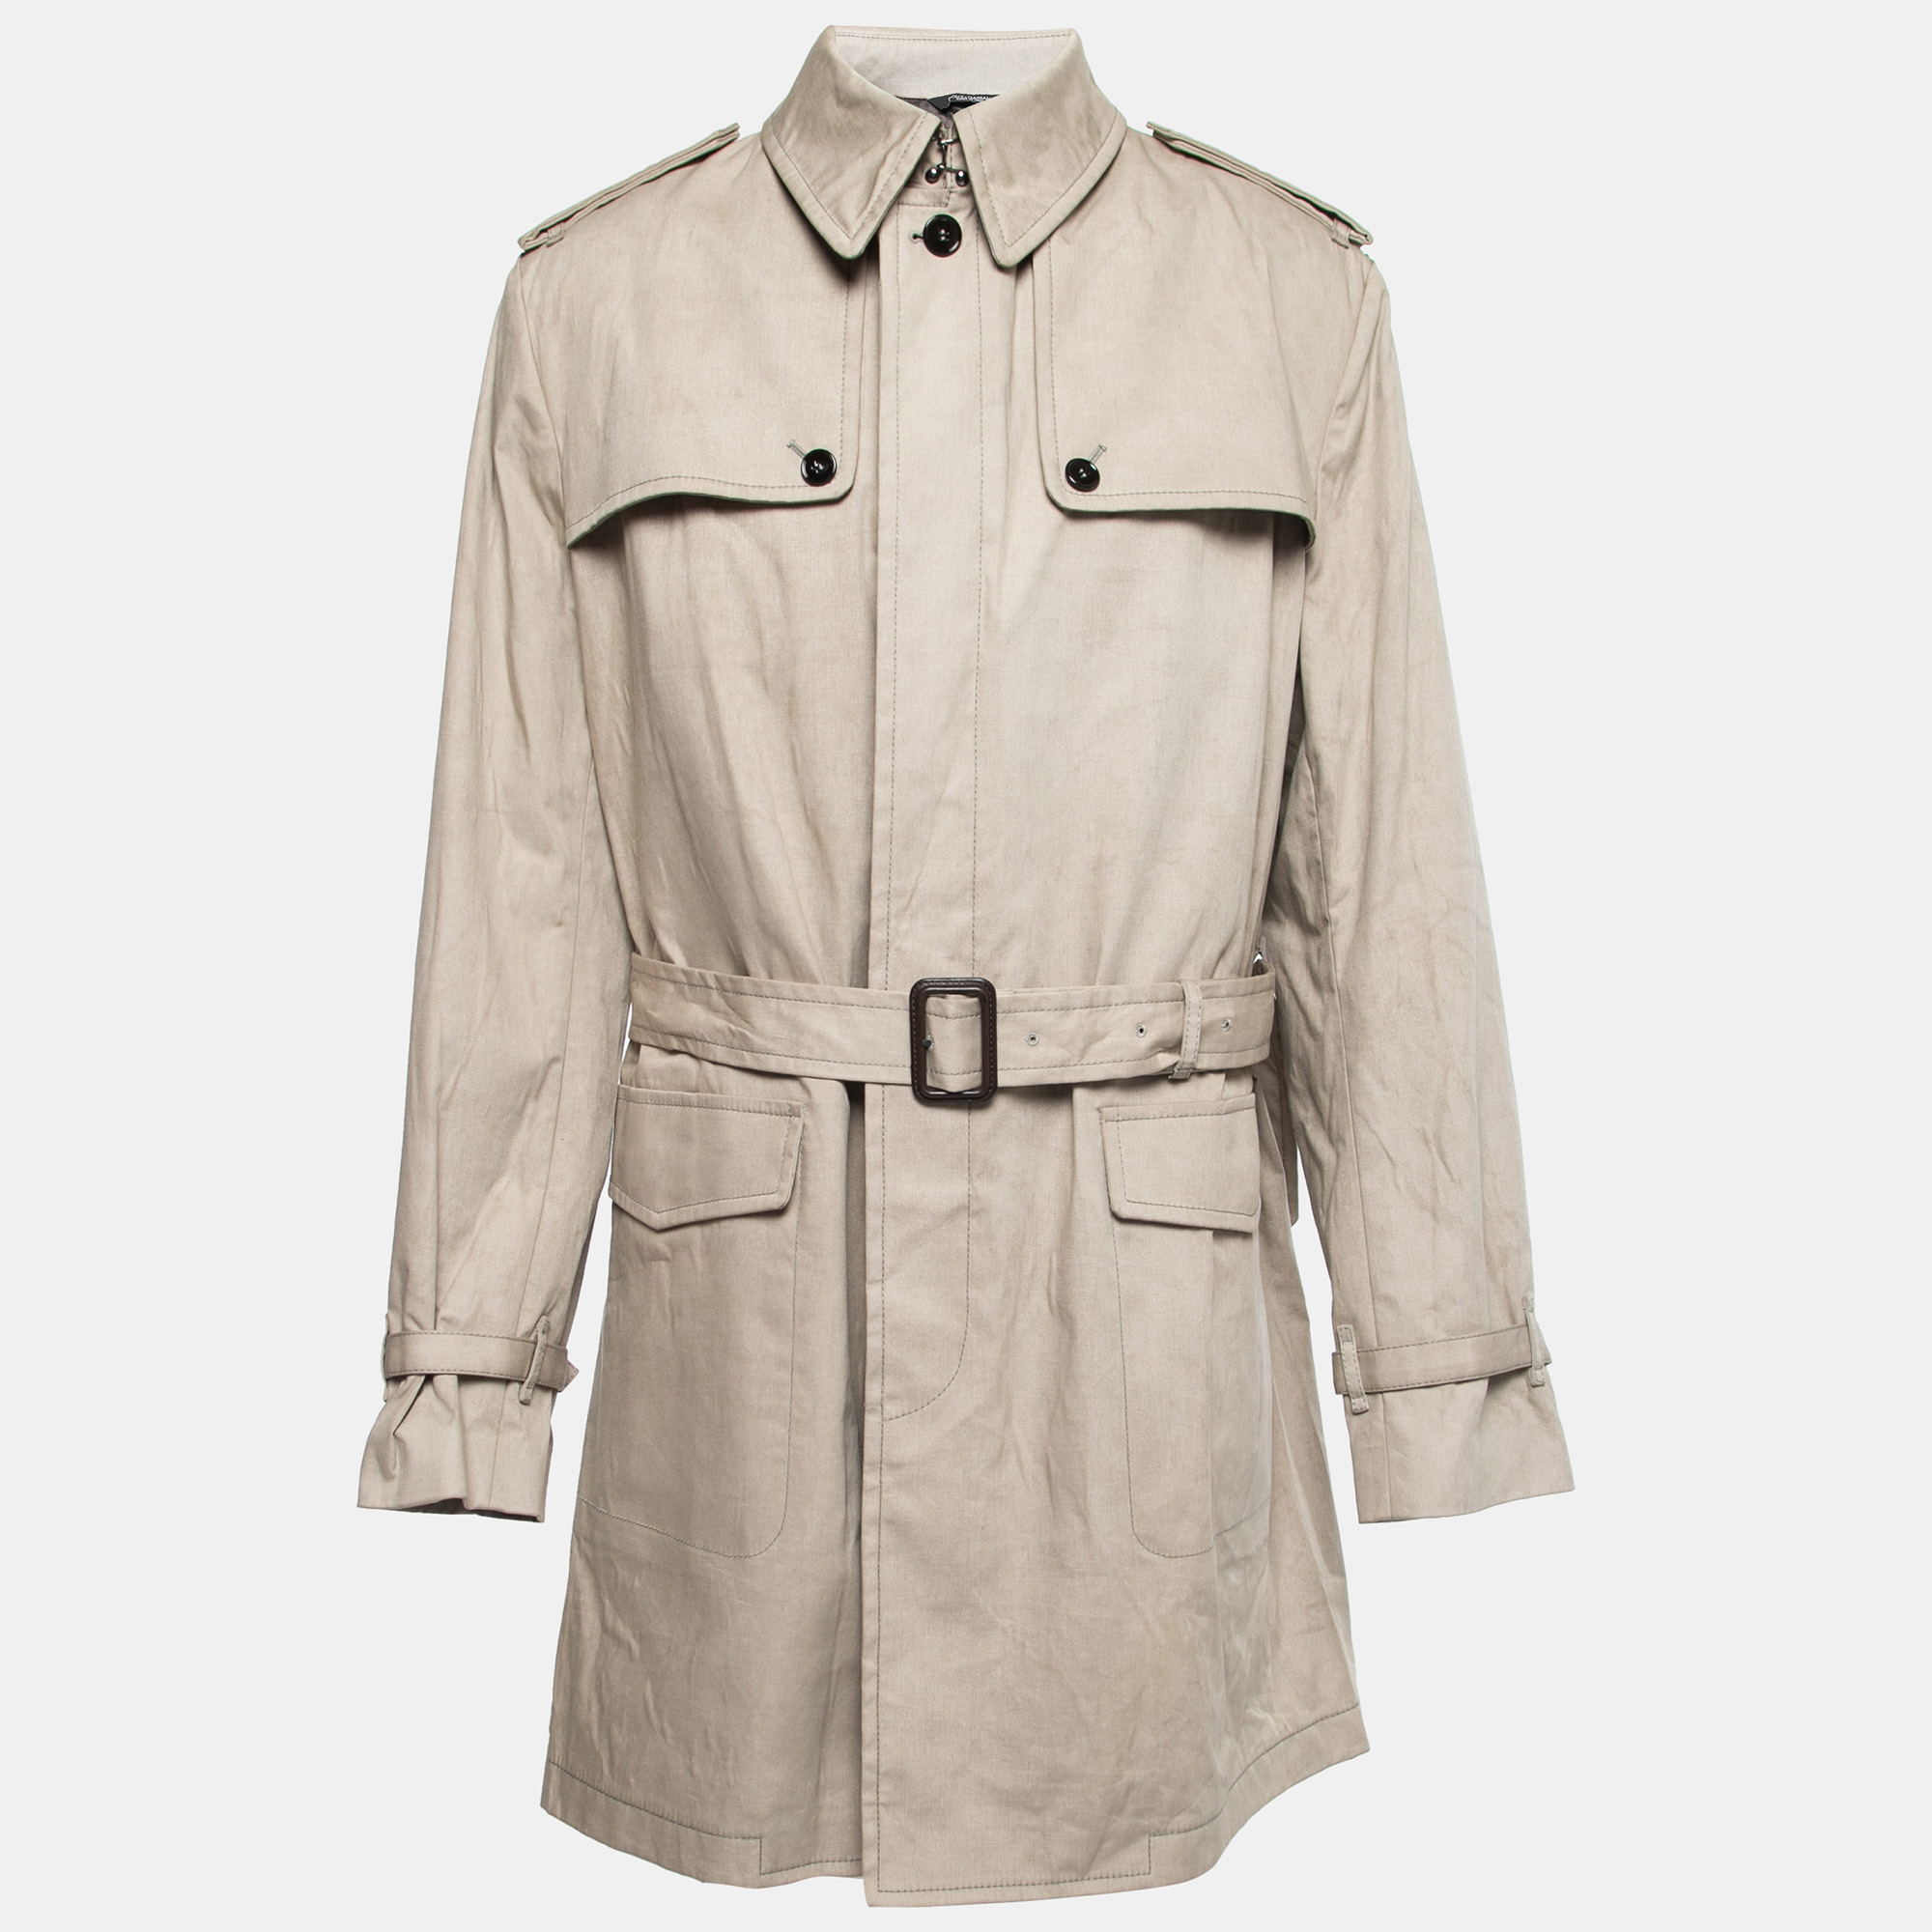 Pre-owned Dolce & Gabbana Sand Beige Cotton Belted Trench Coat 3xl